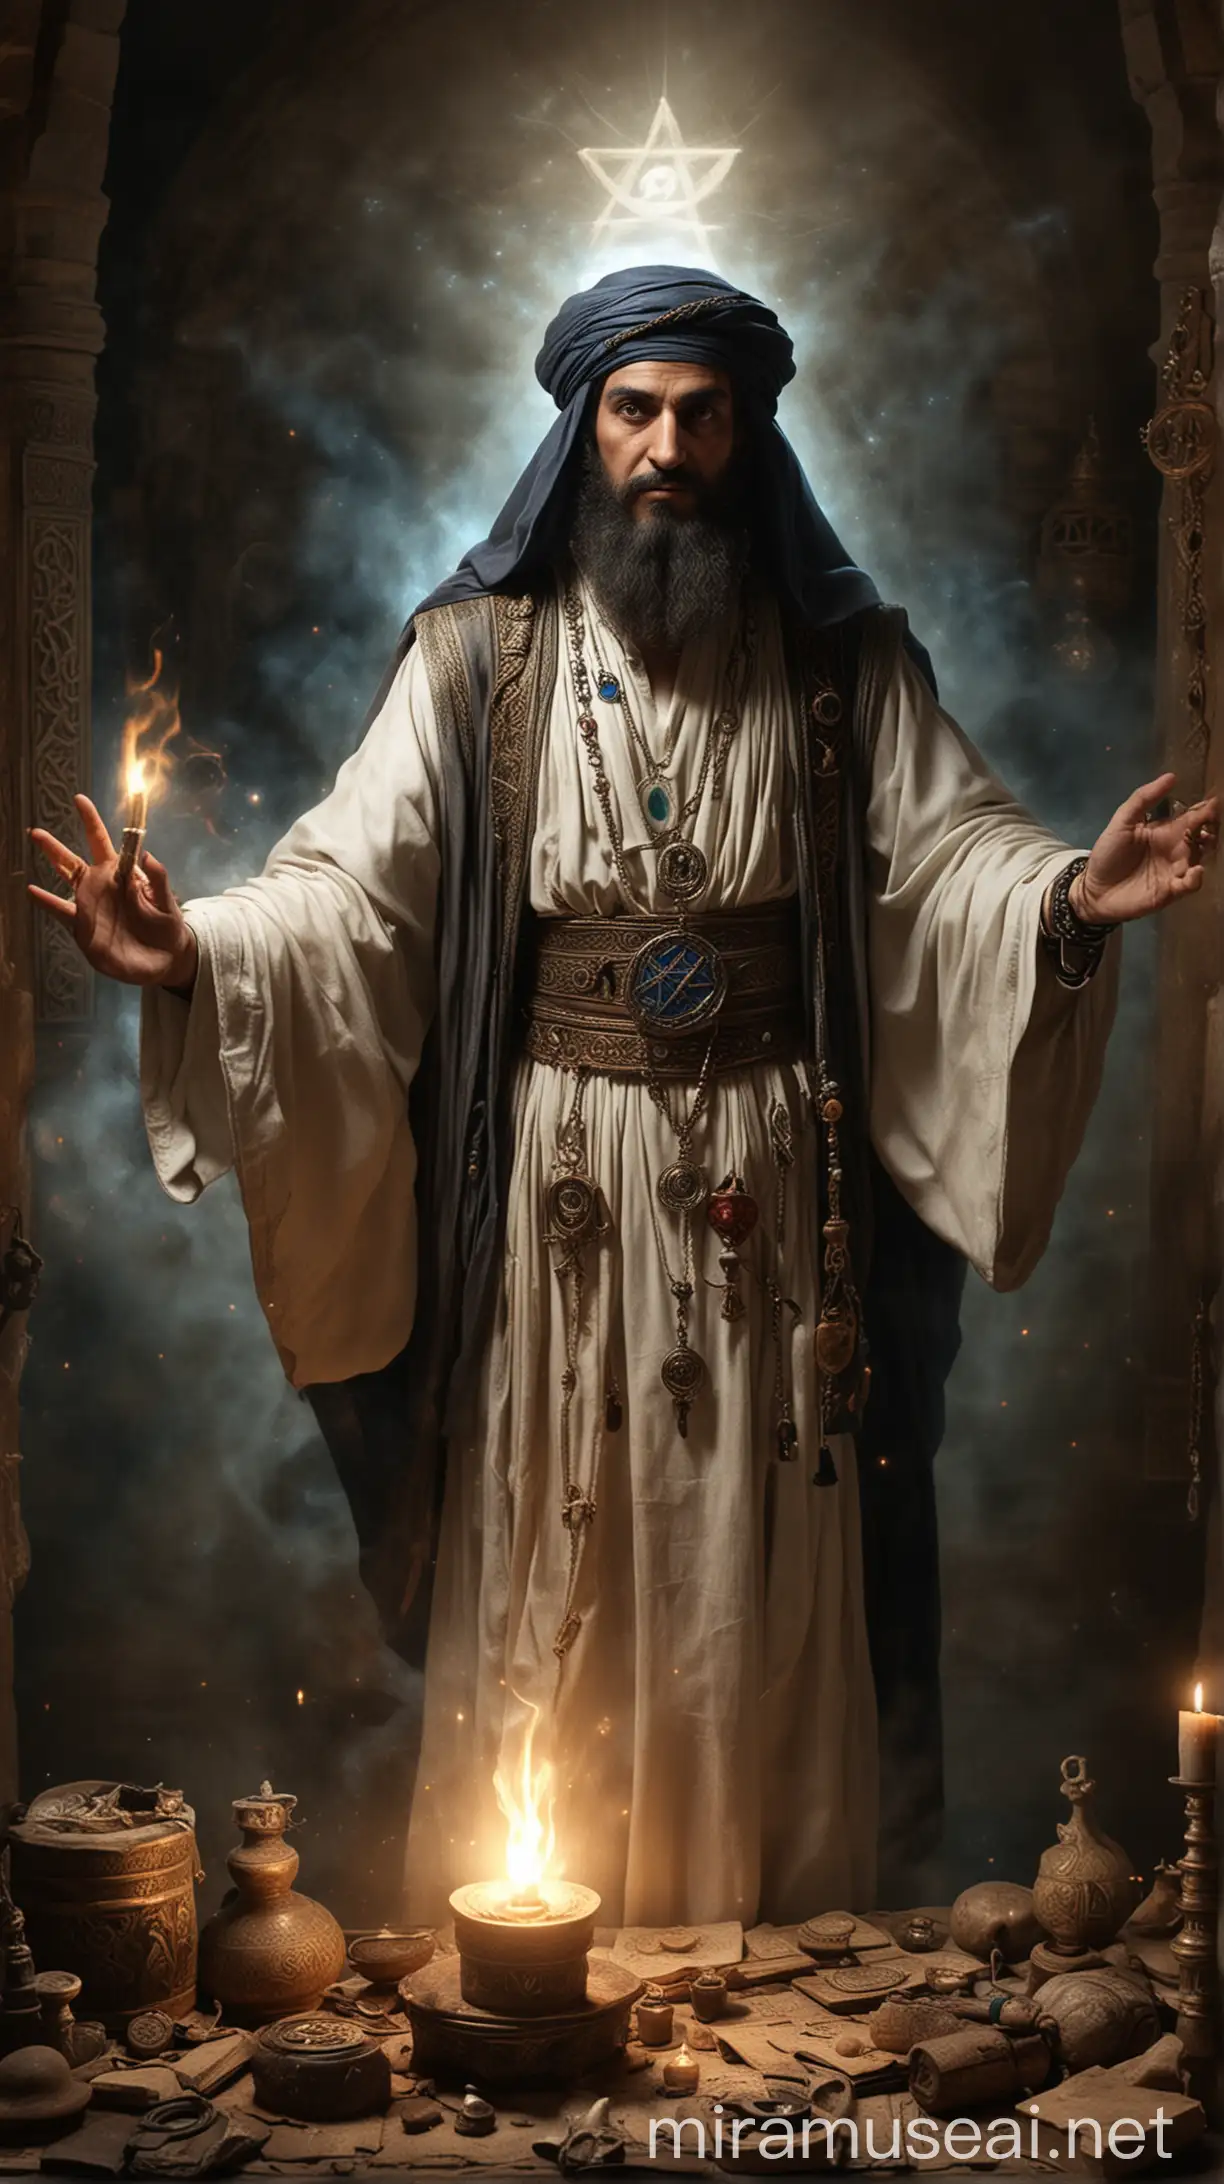 Labid ibn al-A'sam, the Jewish Sorcerer: Create an image of Labid ibn al-A'sam, the Jewish sorcerer, depicted with a mysterious aura and an intense gaze. He should be shown performing secretive incantations, surrounded by mystical symbols and artifacts.